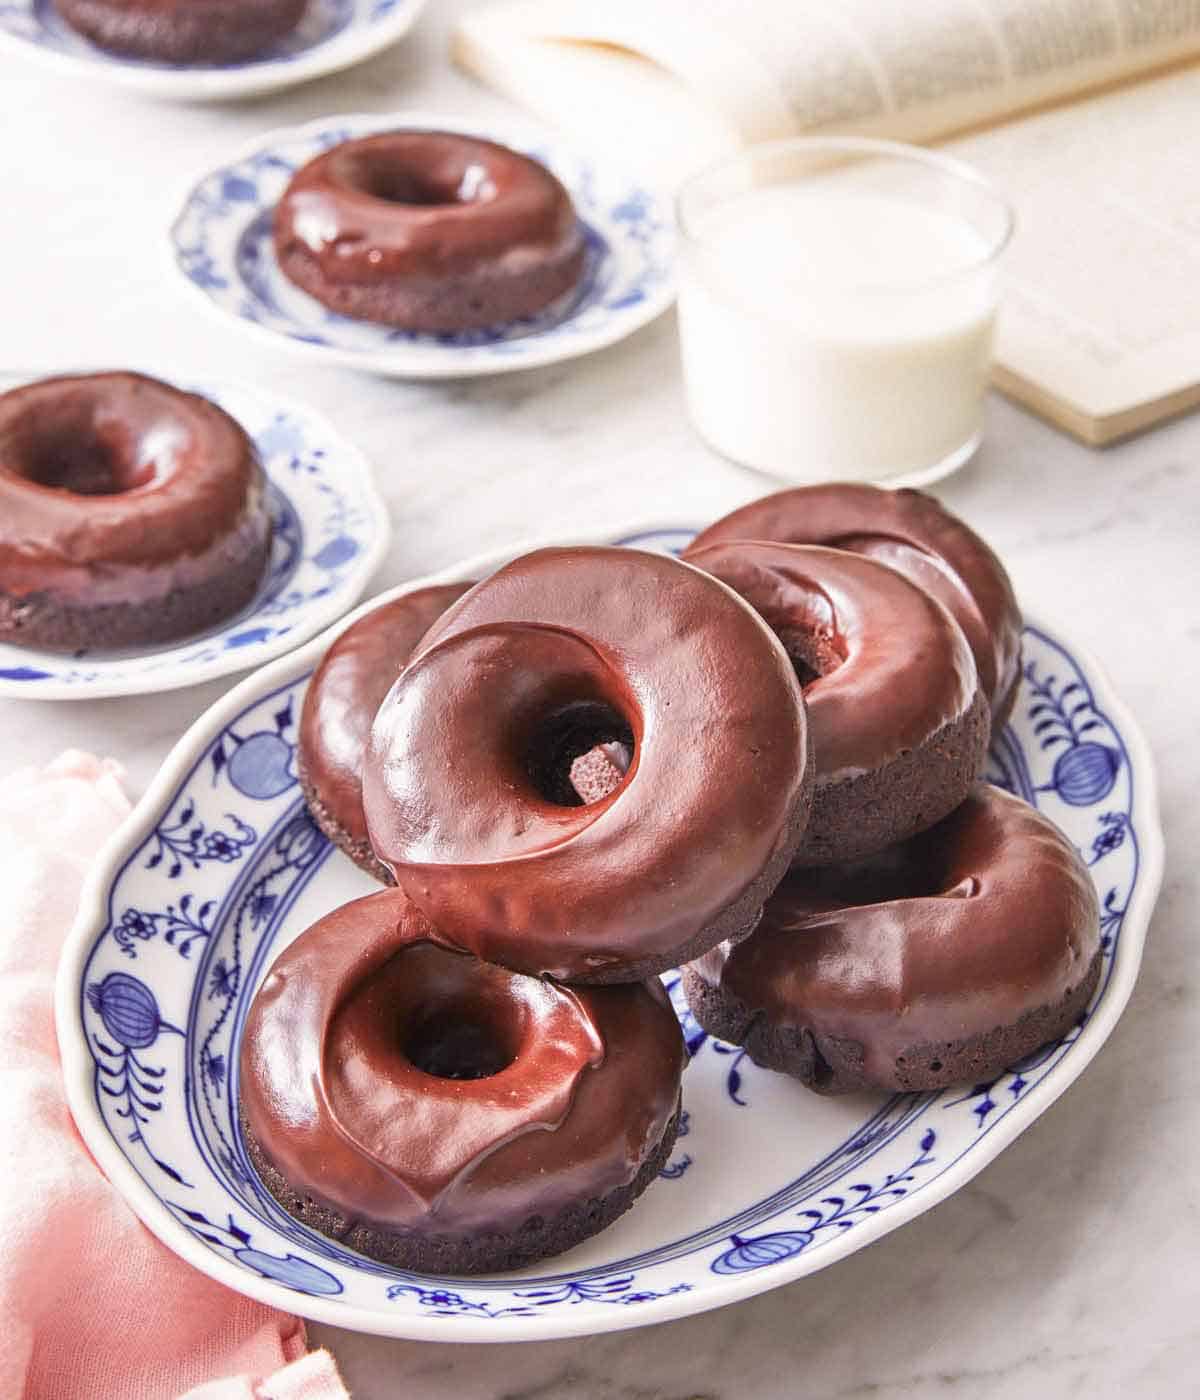 A platter of chocolate donuts with a glass of milk and additional plated donuts in the back.